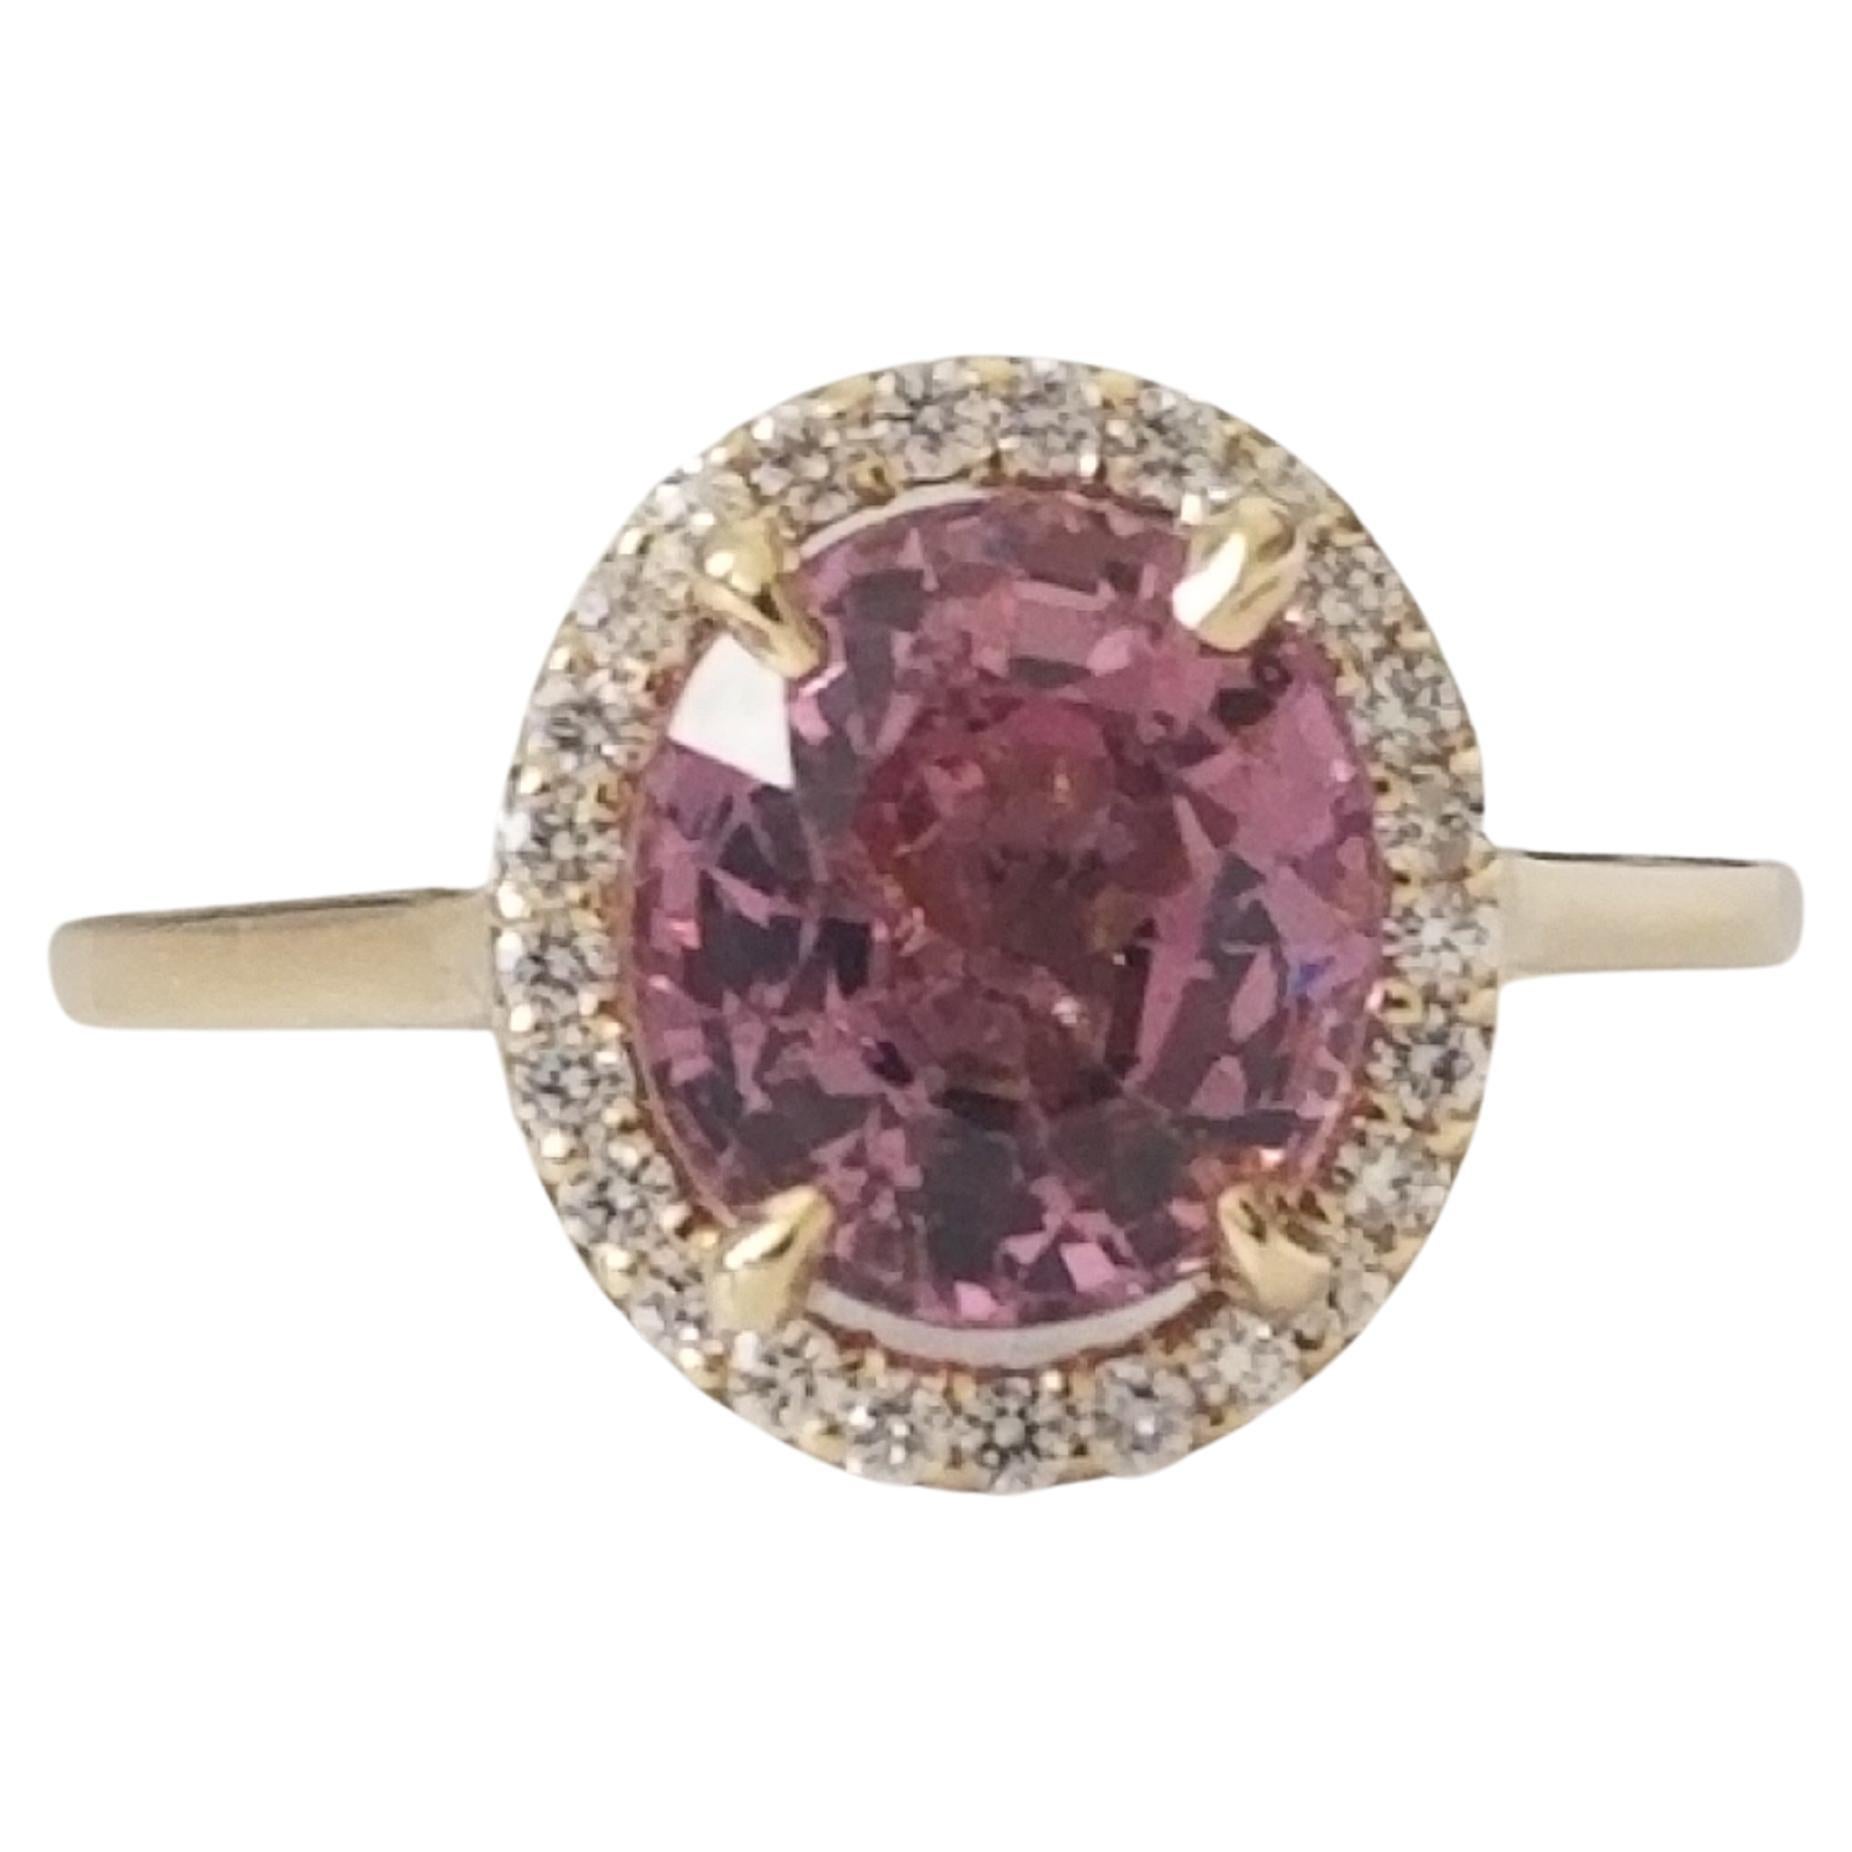 NEW GIA Cert Unheated Natural Oval Pink Spinel Diamond Ring in 14K Yellow Gold